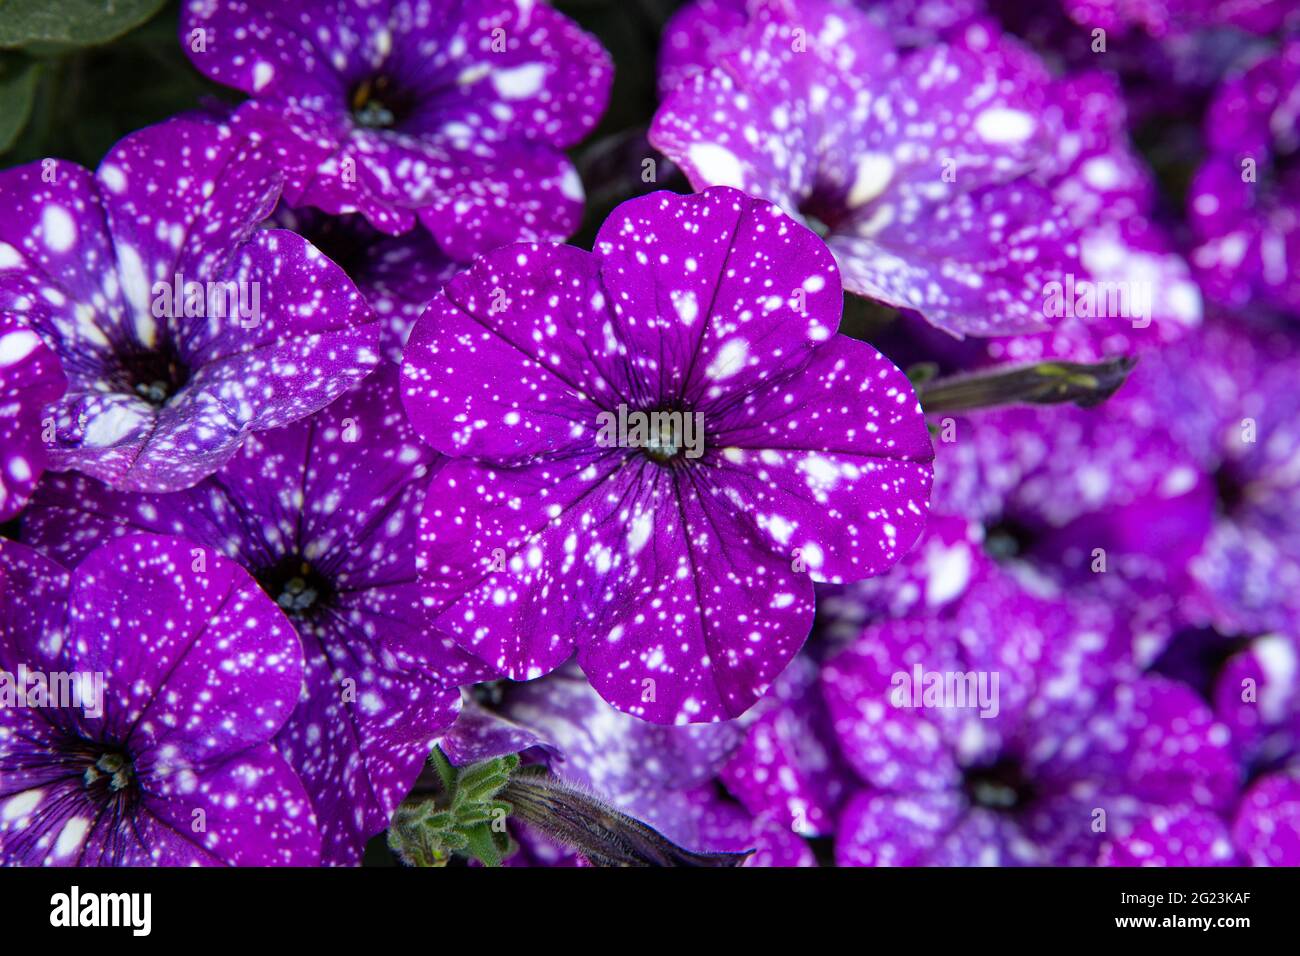 Close up view of petunia flower blossoms called: Night Sky Petunia. Purple color petunia blossoms with white spots, looking like galaxy. Stock Photo